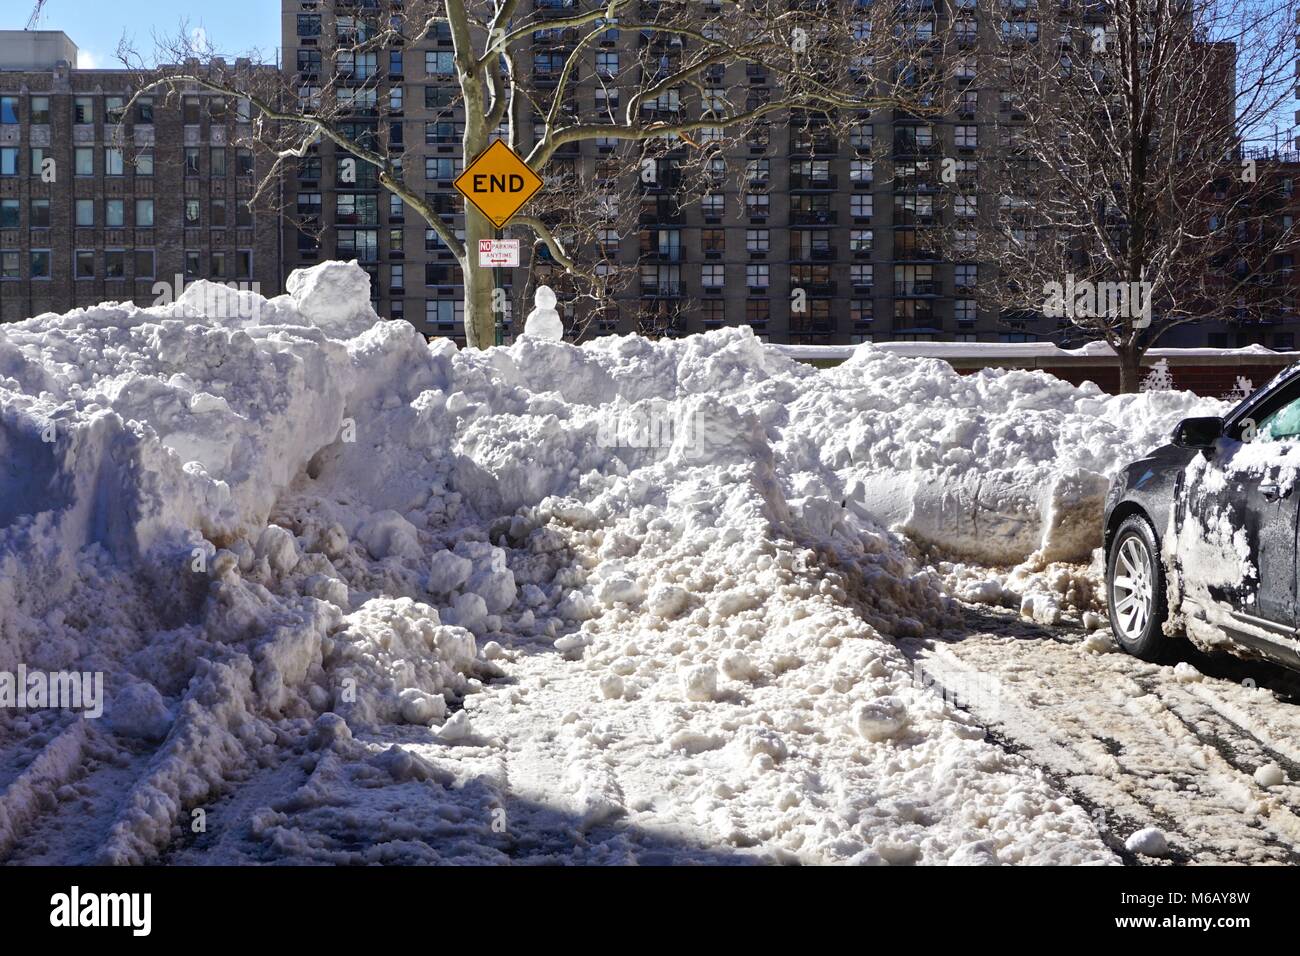 Midtown Manhattan, New York City: “END” and “No Parking Anytime” signs with a pile of snow that was plowed into a cul-de-sac after a blizzard. Stock Photo